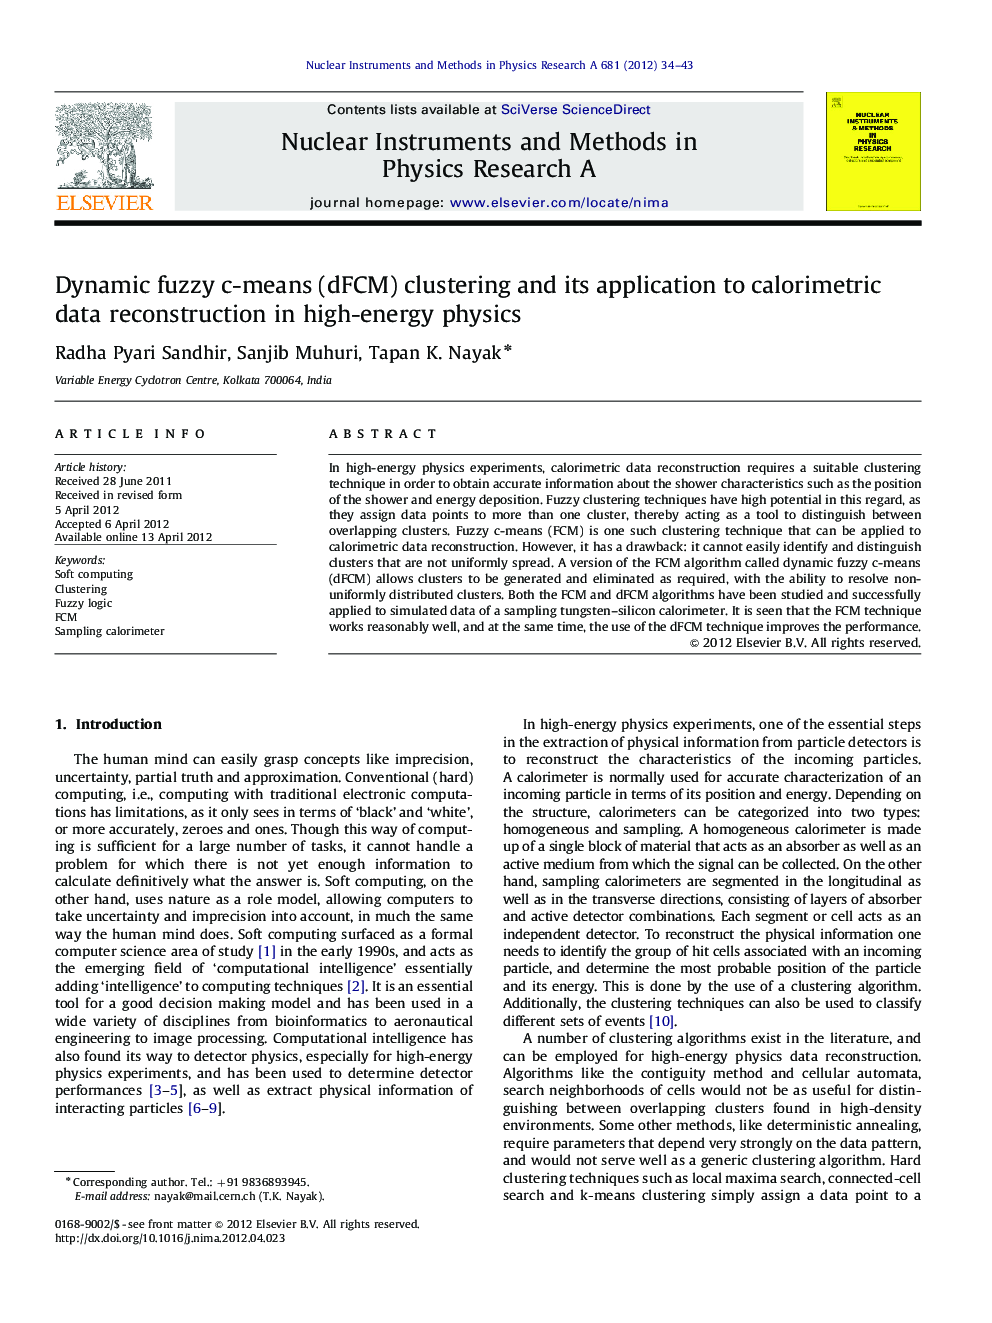 Dynamic fuzzy c-means (dFCM) clustering and its application to calorimetric data reconstruction in high-energy physics